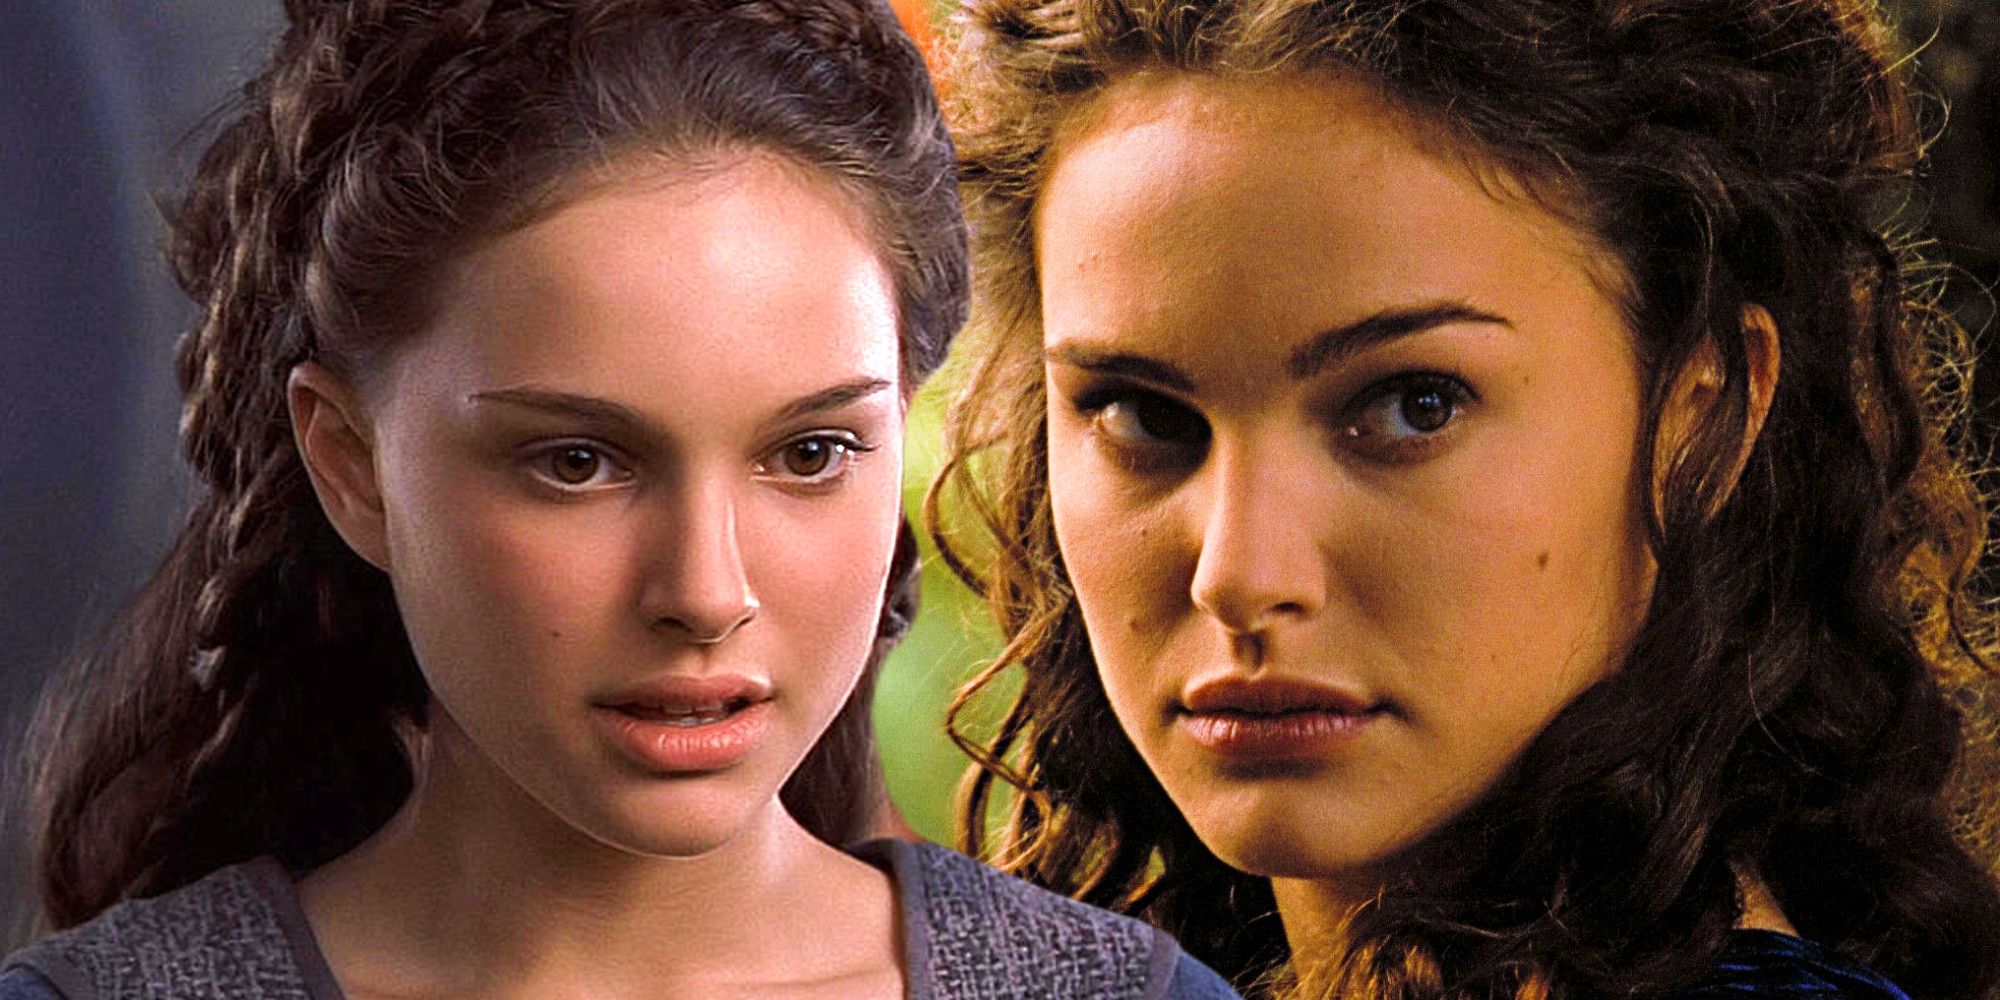 natalie-portman-reveals-how-she-brought-padme-amidala-to-life-–-but-george-lucas-still-wasn’t-happy-with-the-result!